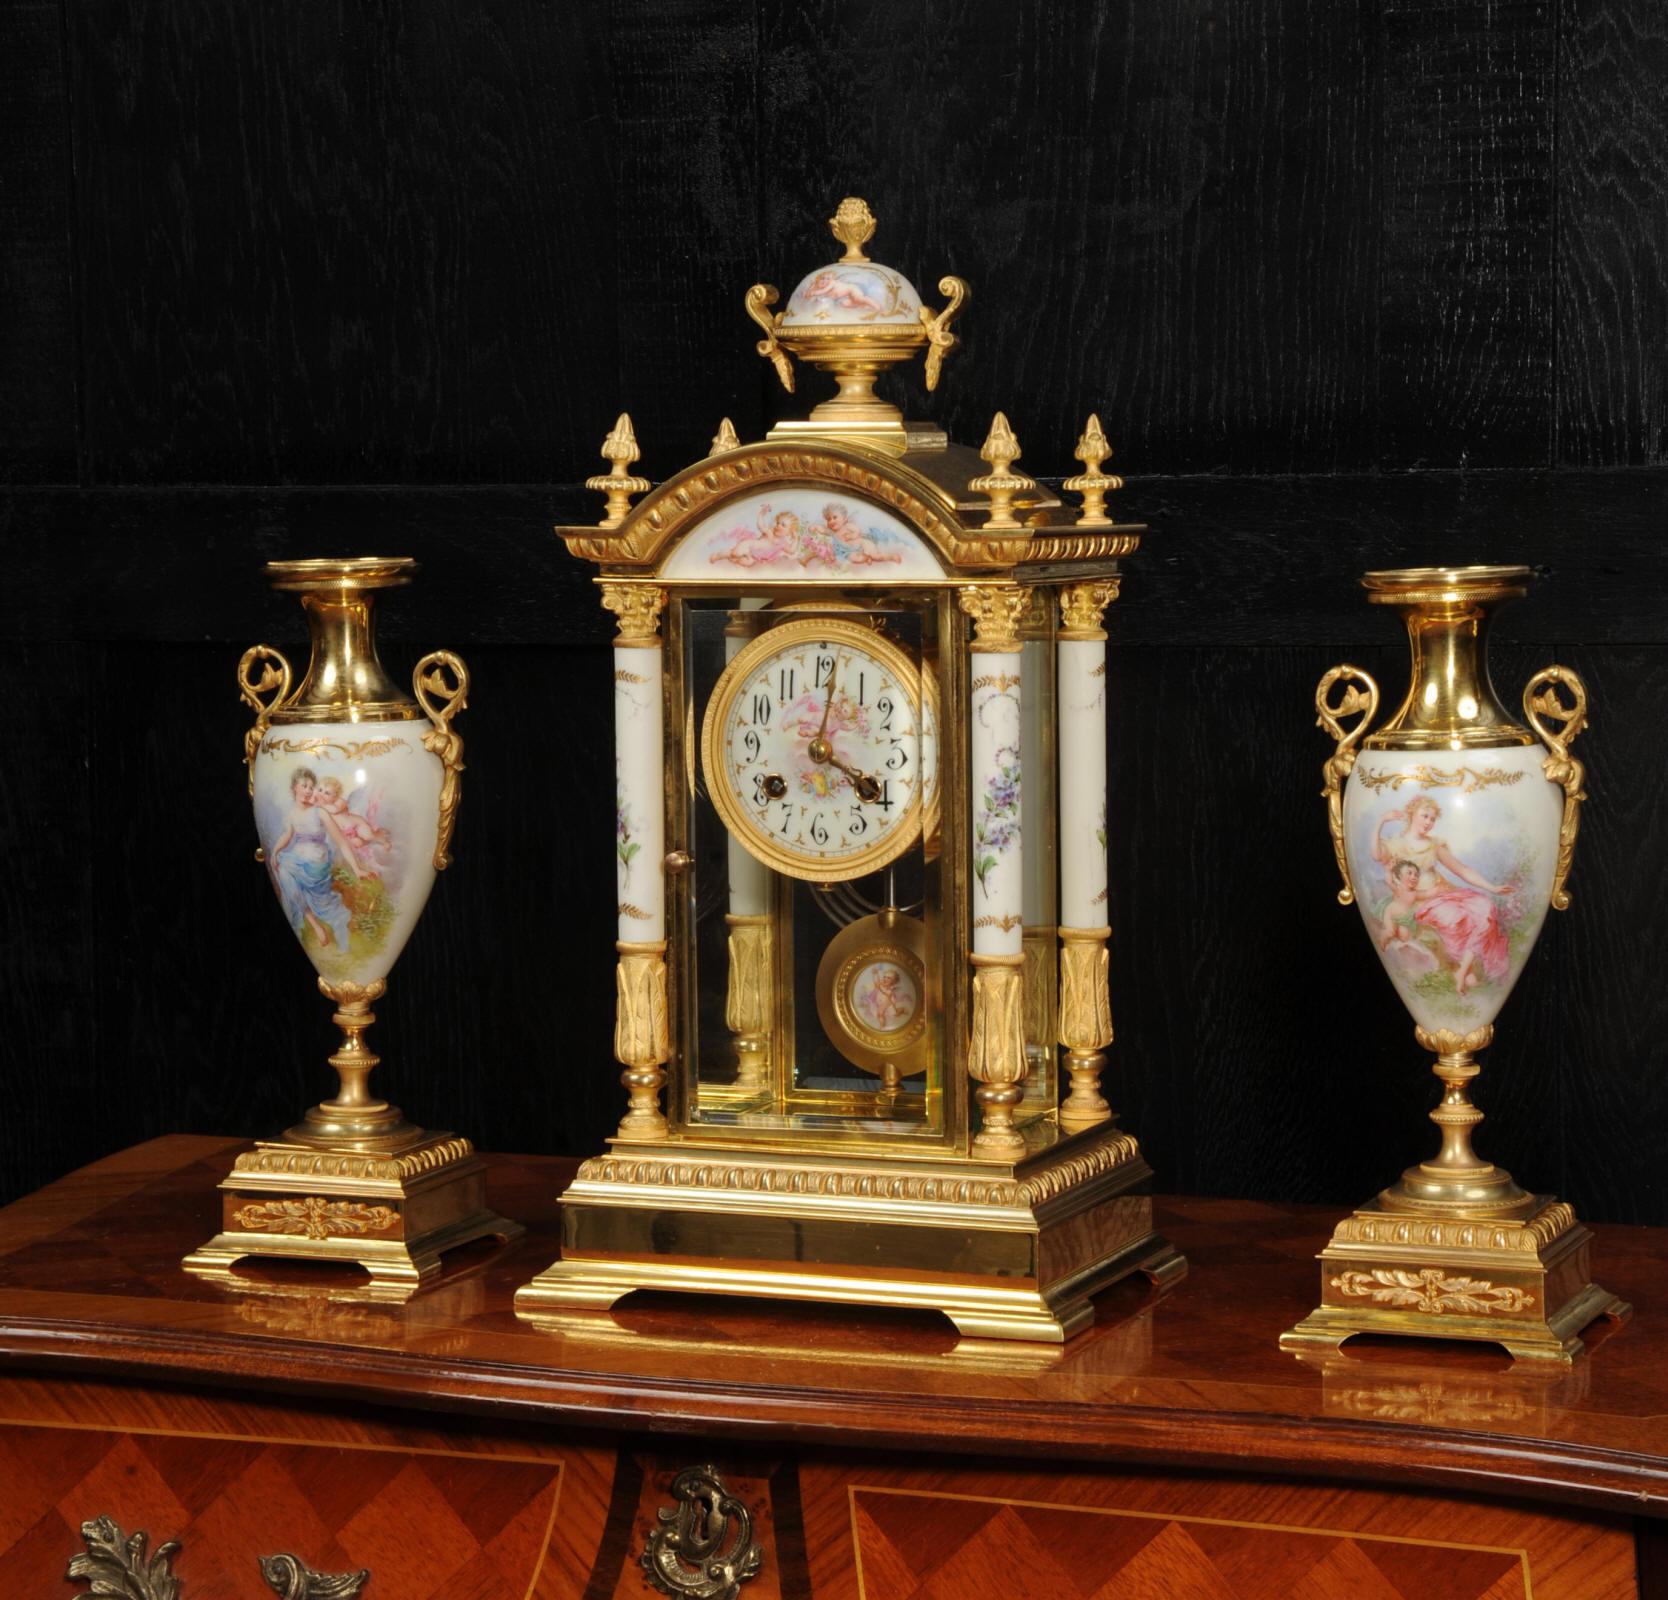 A rare and beautiful antique French clock garniture, in excellent original condition. Ormolu (fine gilded bronze) is mounted with exquisitely painted Sèvres style porcelain. Porcelain is very finely painted with maidens and putti on a cream ground.